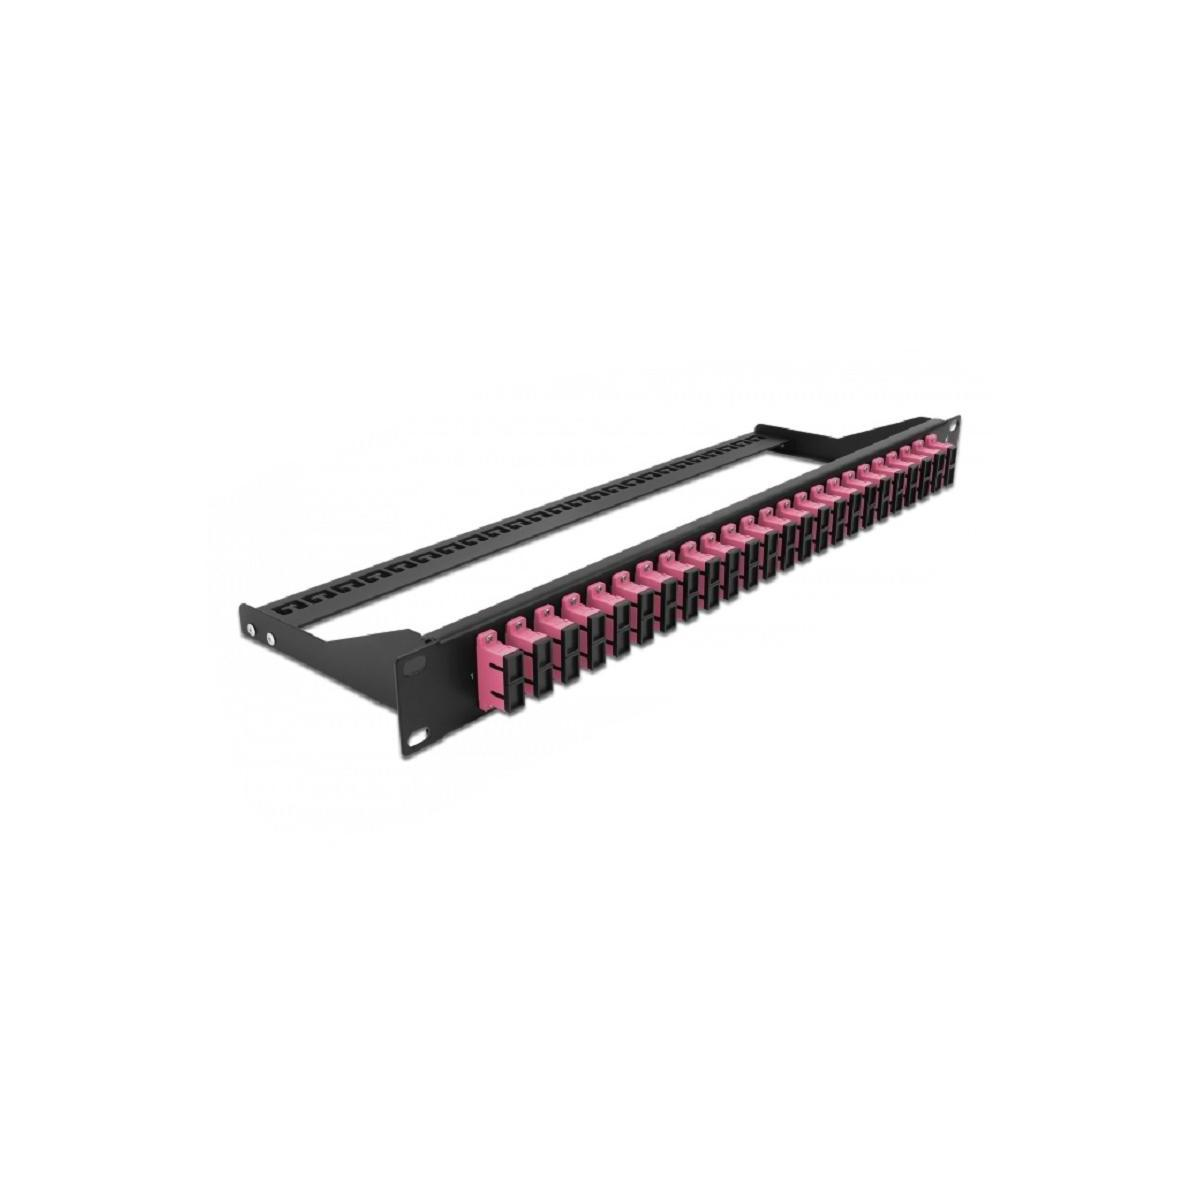 DELOCK 43396 Patchpanel